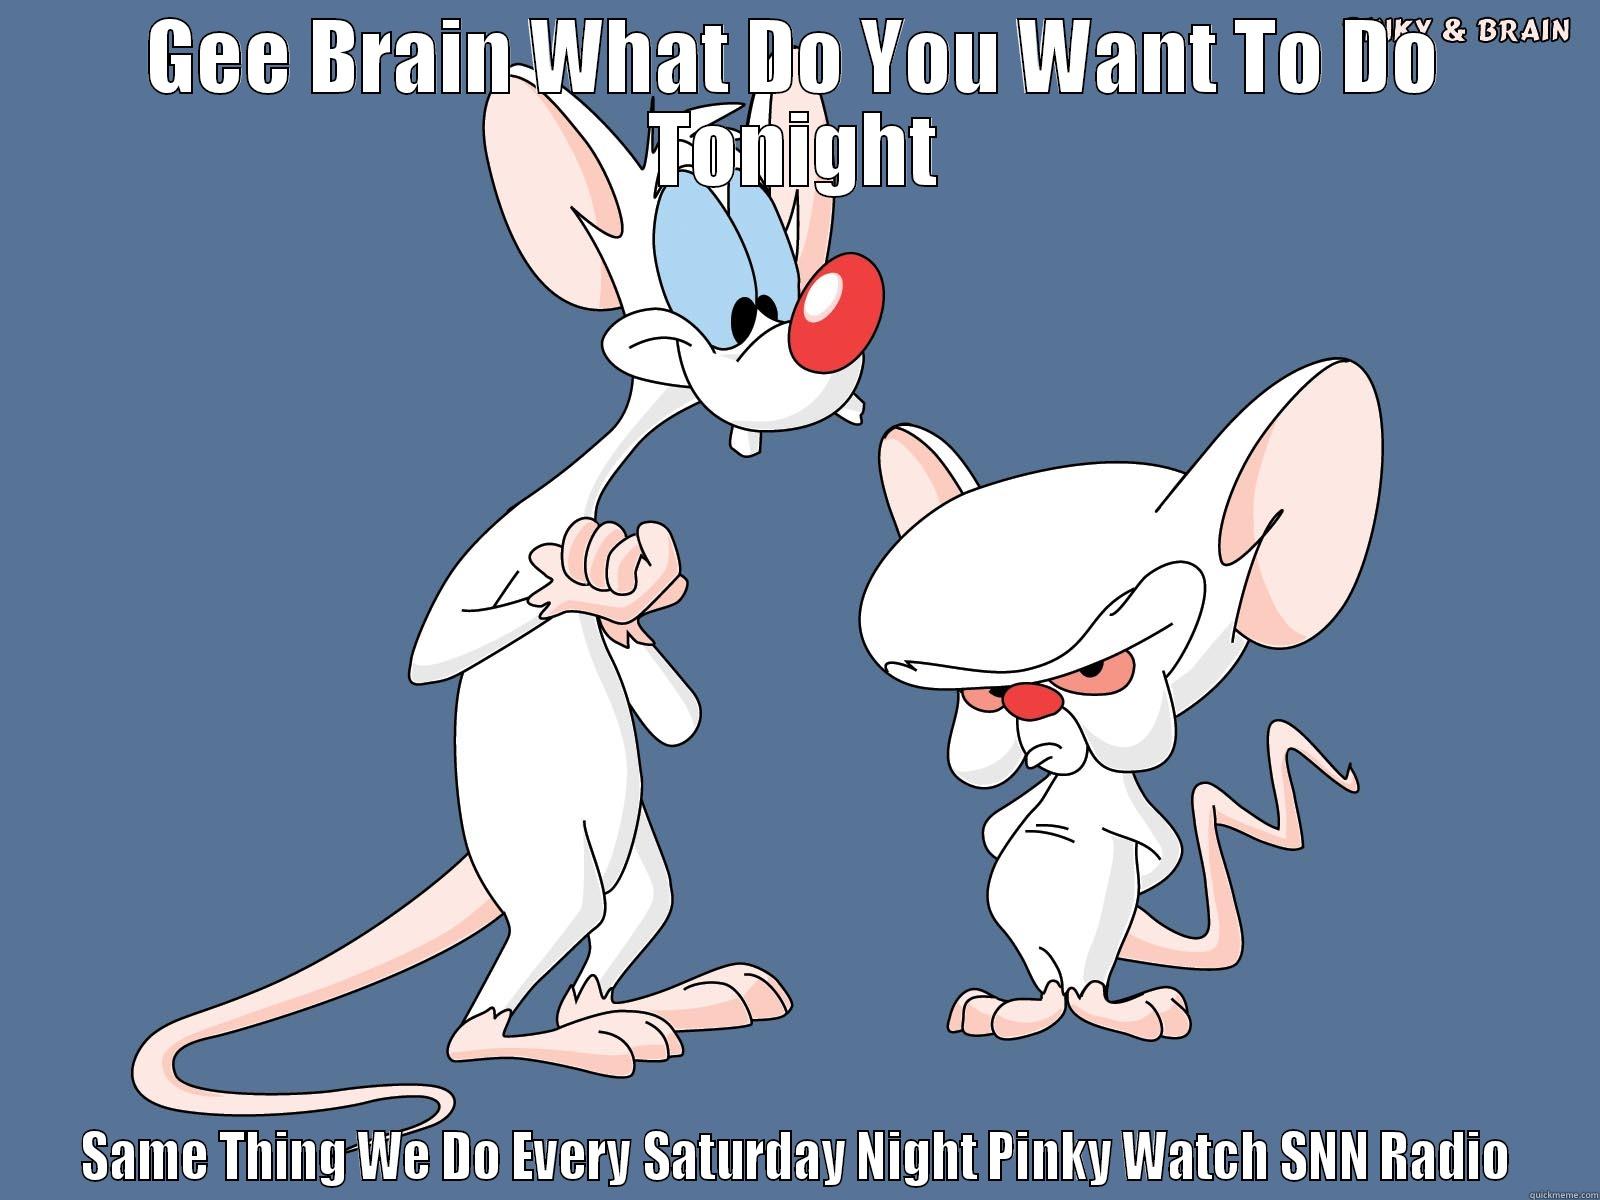 Pinky and the brain Saturday nights  - GEE BRAIN WHAT DO YOU WANT TO DO TONIGHT SAME THING WE DO EVERY SATURDAY NIGHT PINKY WATCH SNN RADIO Misc